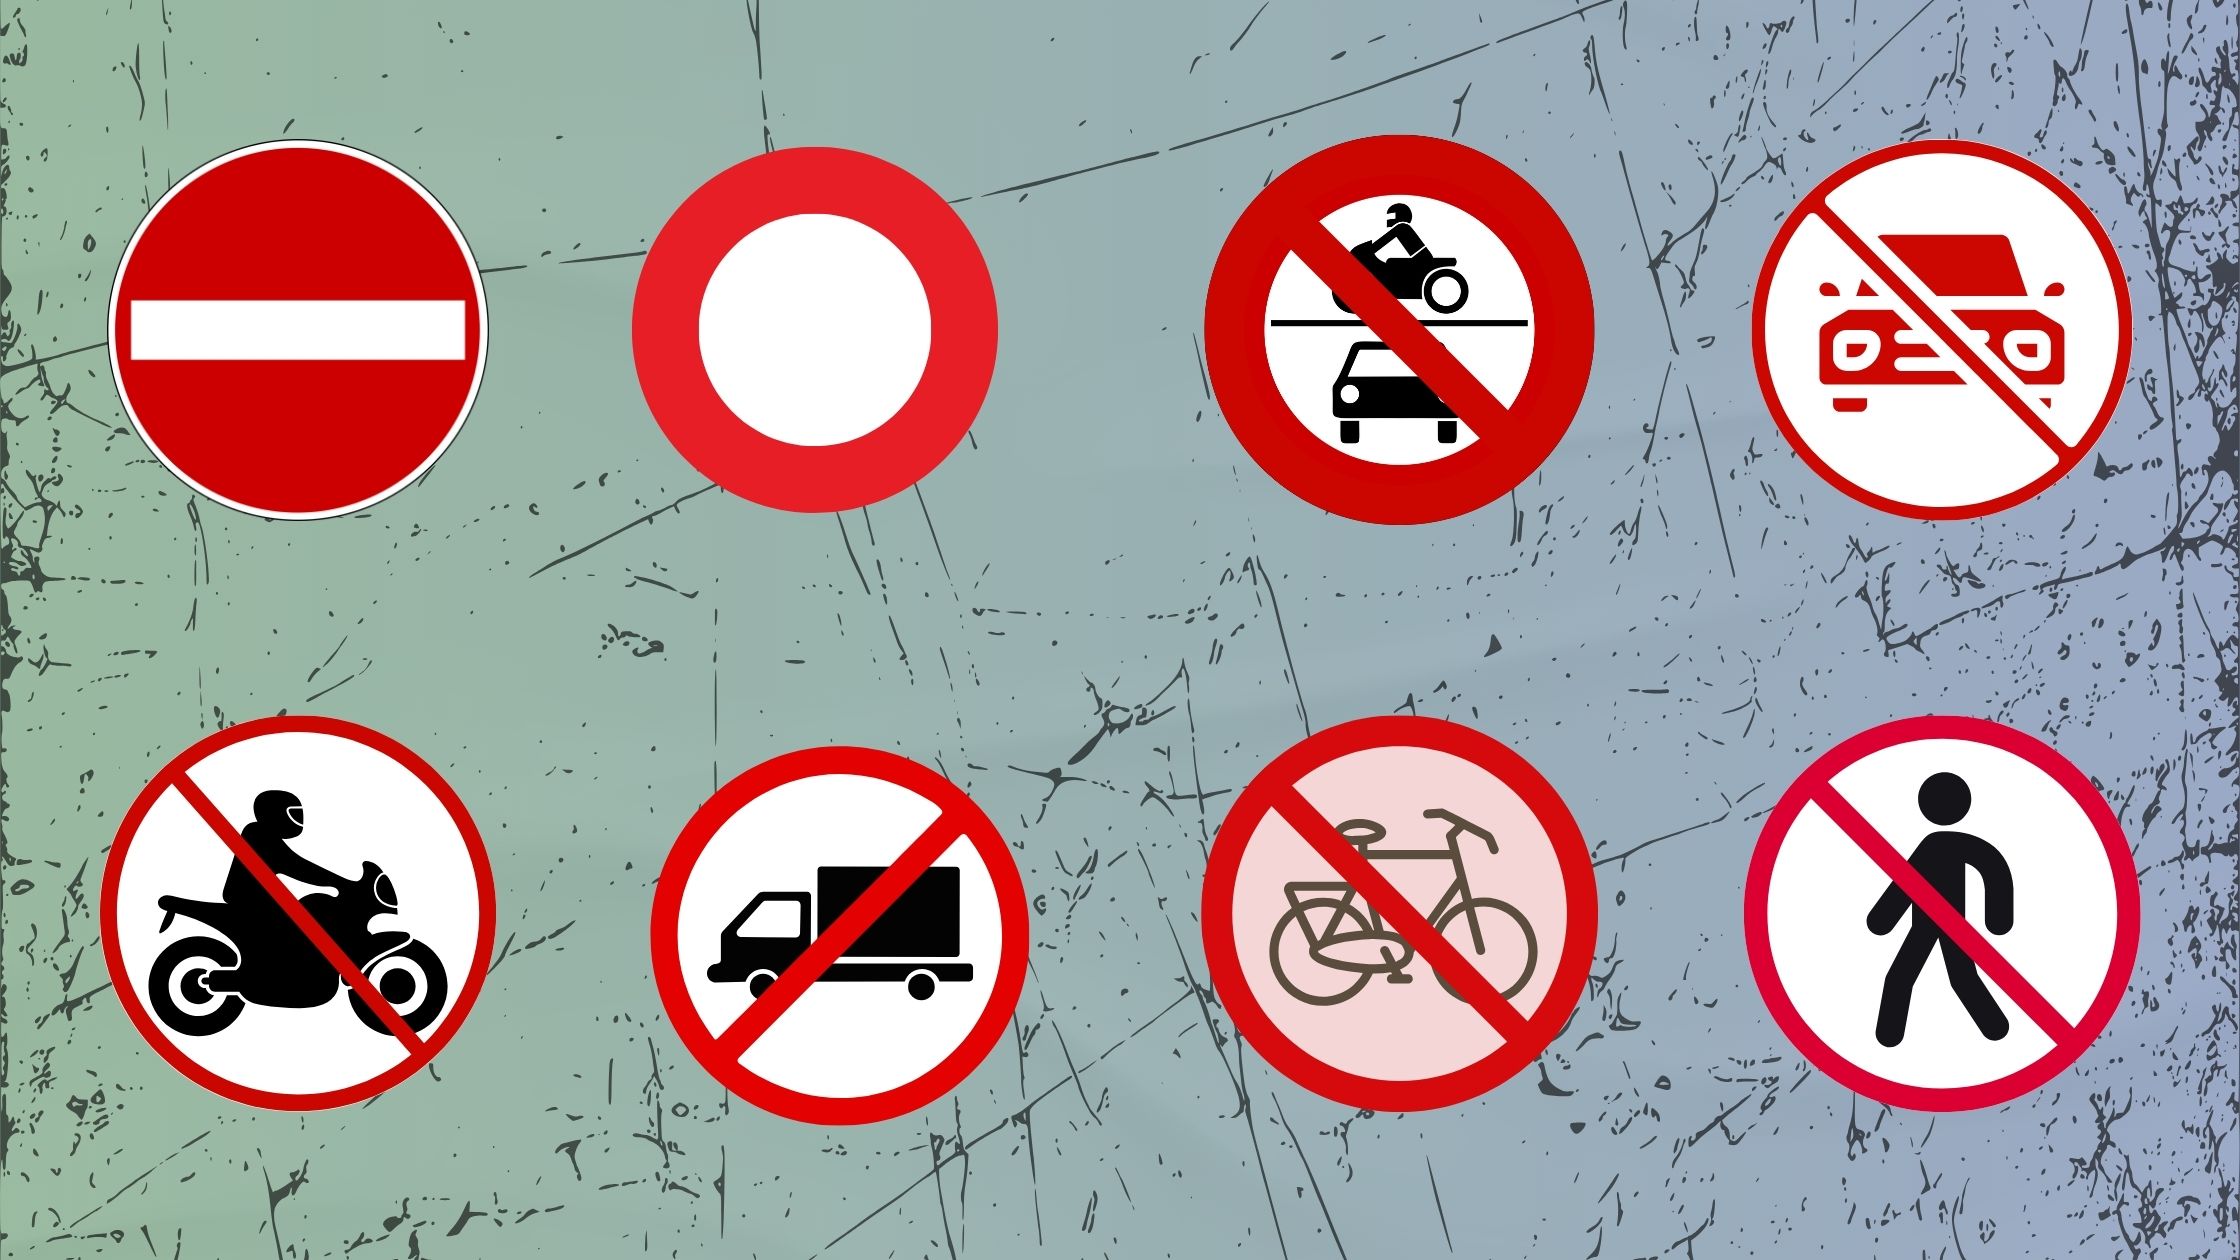 Prohibitory road signs in Sweden